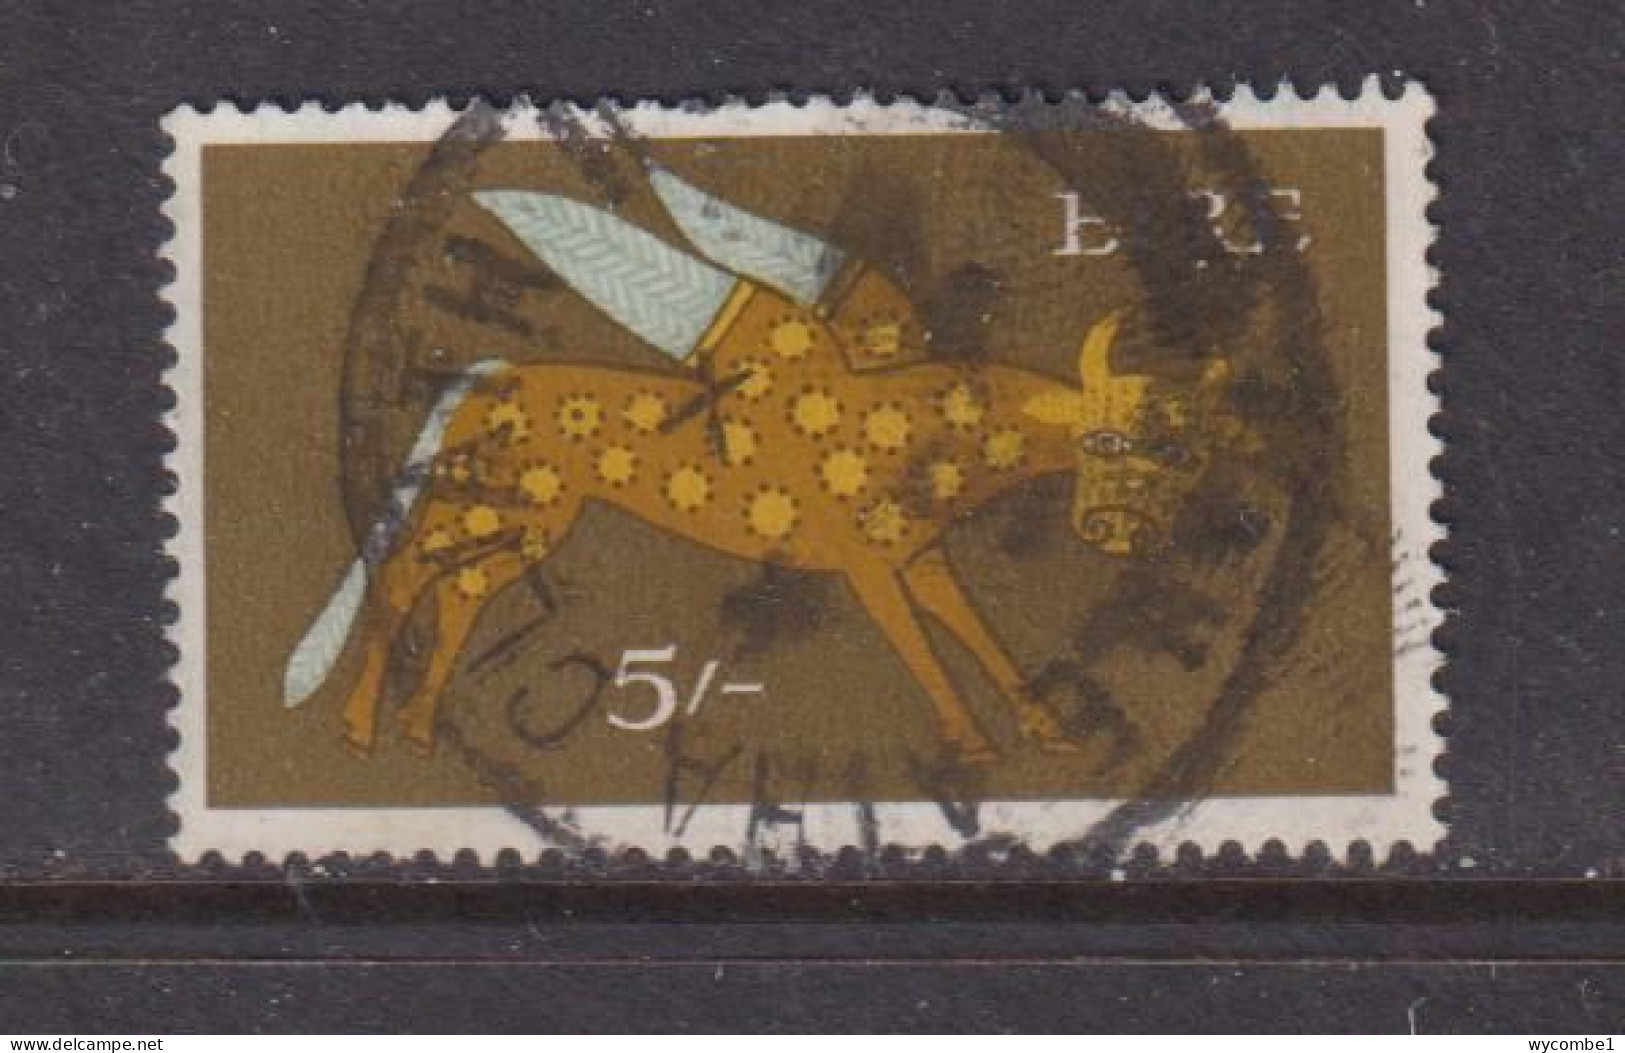 IRELAND -  1968  Definitives  5s  Used As Scan - Gebraucht